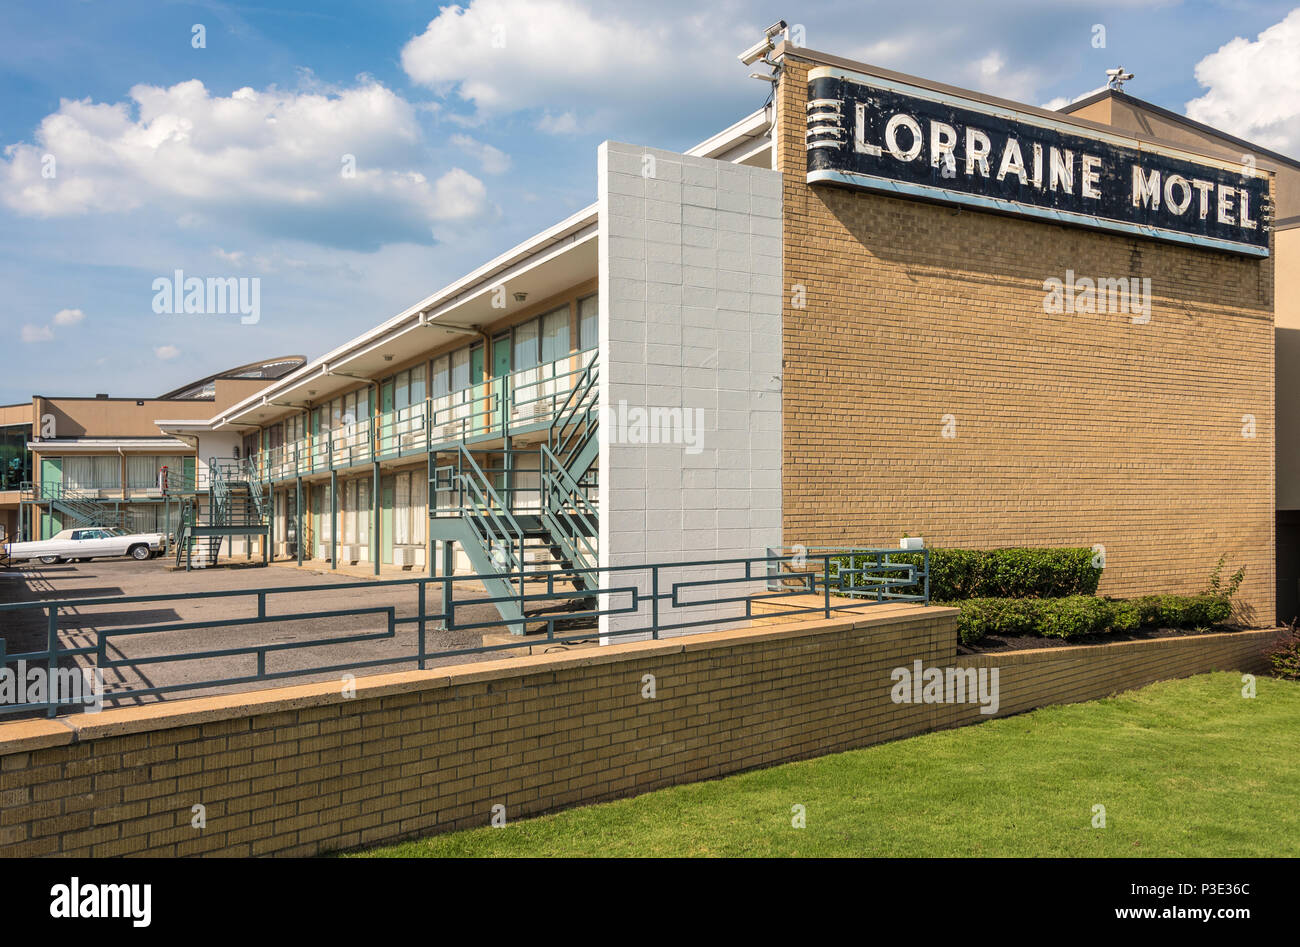 The Lorraine Motel, site of Martin Luther King's assassination on April 4, 1968, in Memphis, Tennessee. (USA) Stock Photo